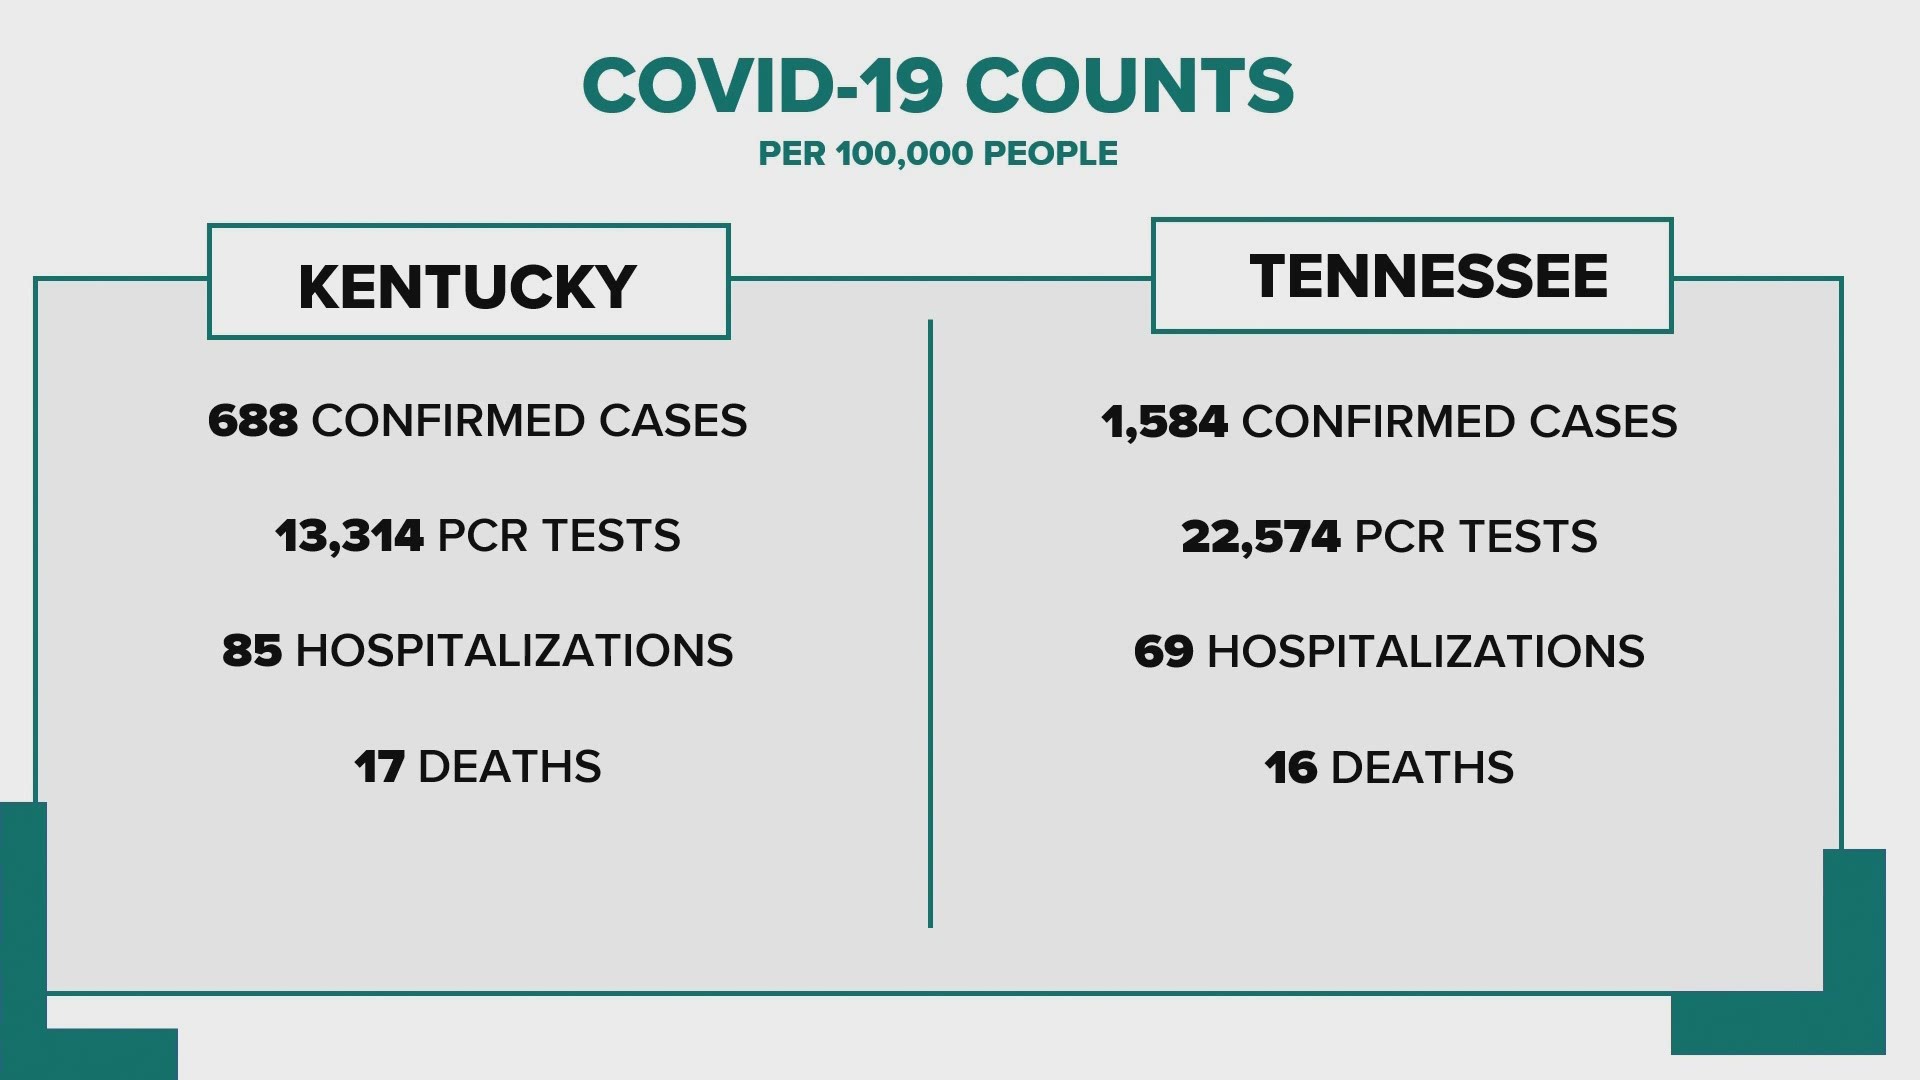 ADJUSTED FOR POPULATION DIFFERENCES, KENTUCKY LAGS FAR BEHIND TENNESSEE IN TESTING AND CONFIRMED CASES BUT HAS SEEN MORE DEATHS AND HOSPITALIZATIONS.